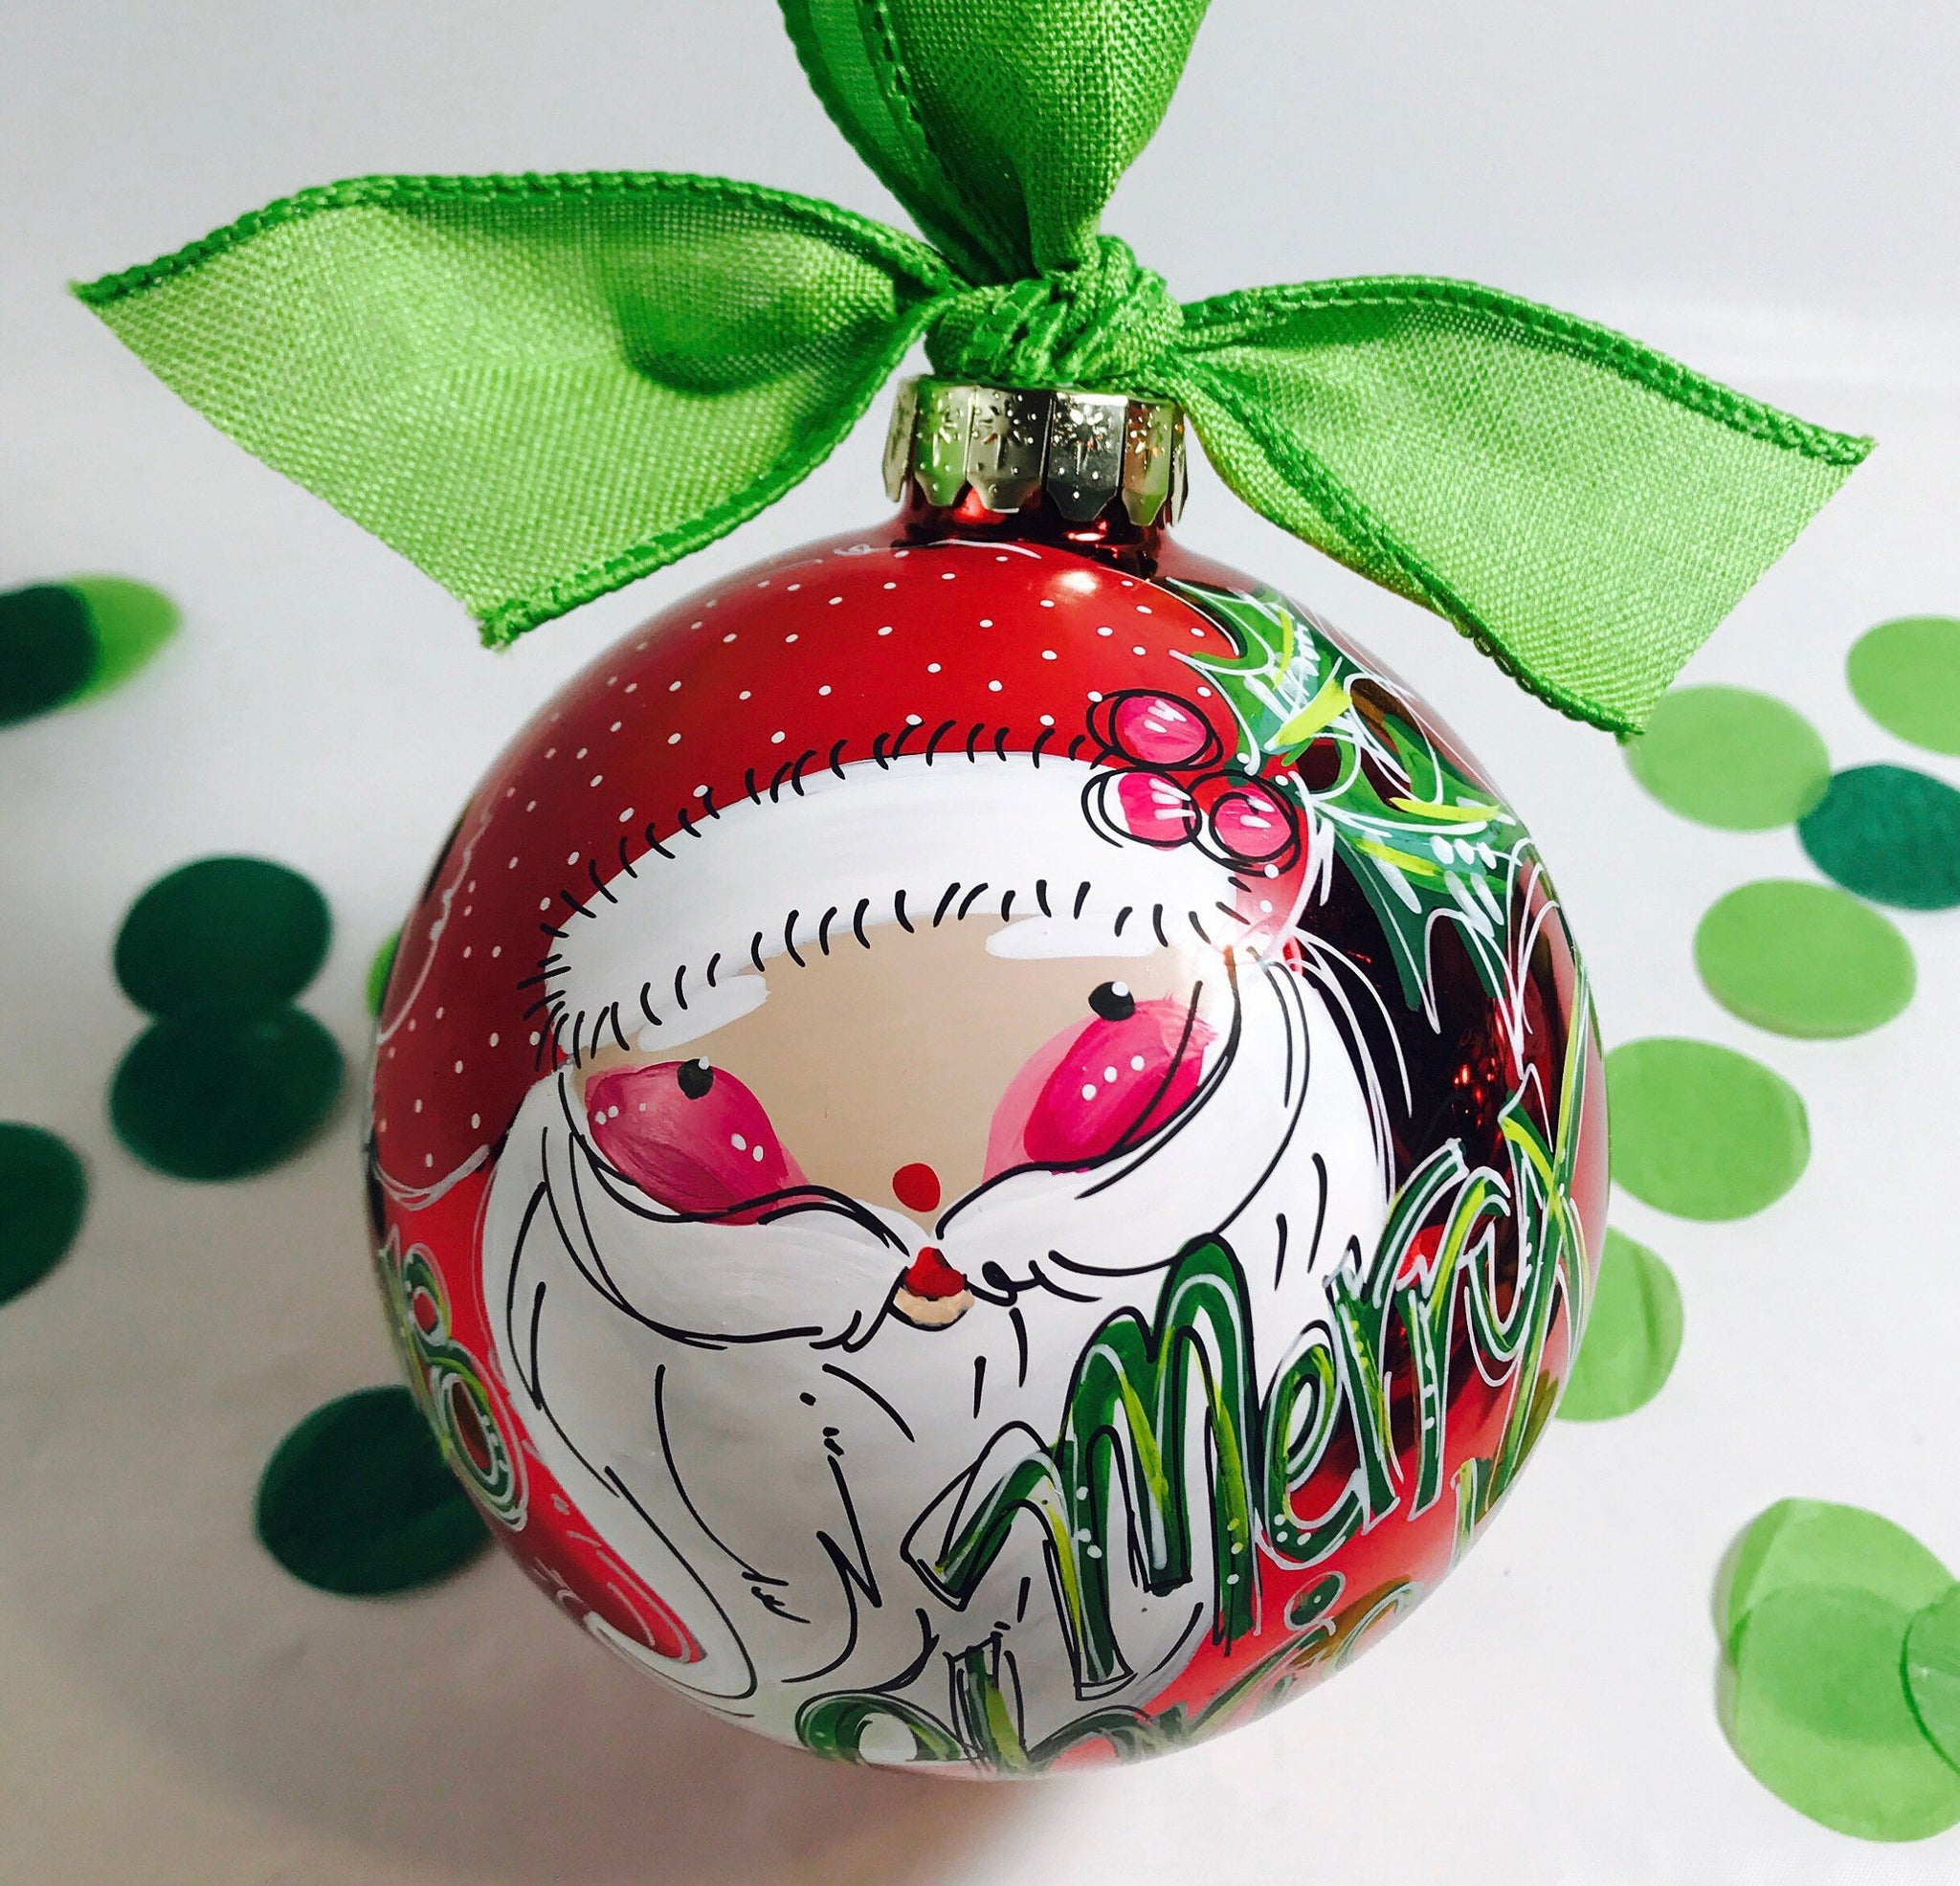 Orders Placed after 11/17 will Arrive after Christmas. ORNAMENT, PERSONALIZED SANTA on Shiny Red Holiday Ball